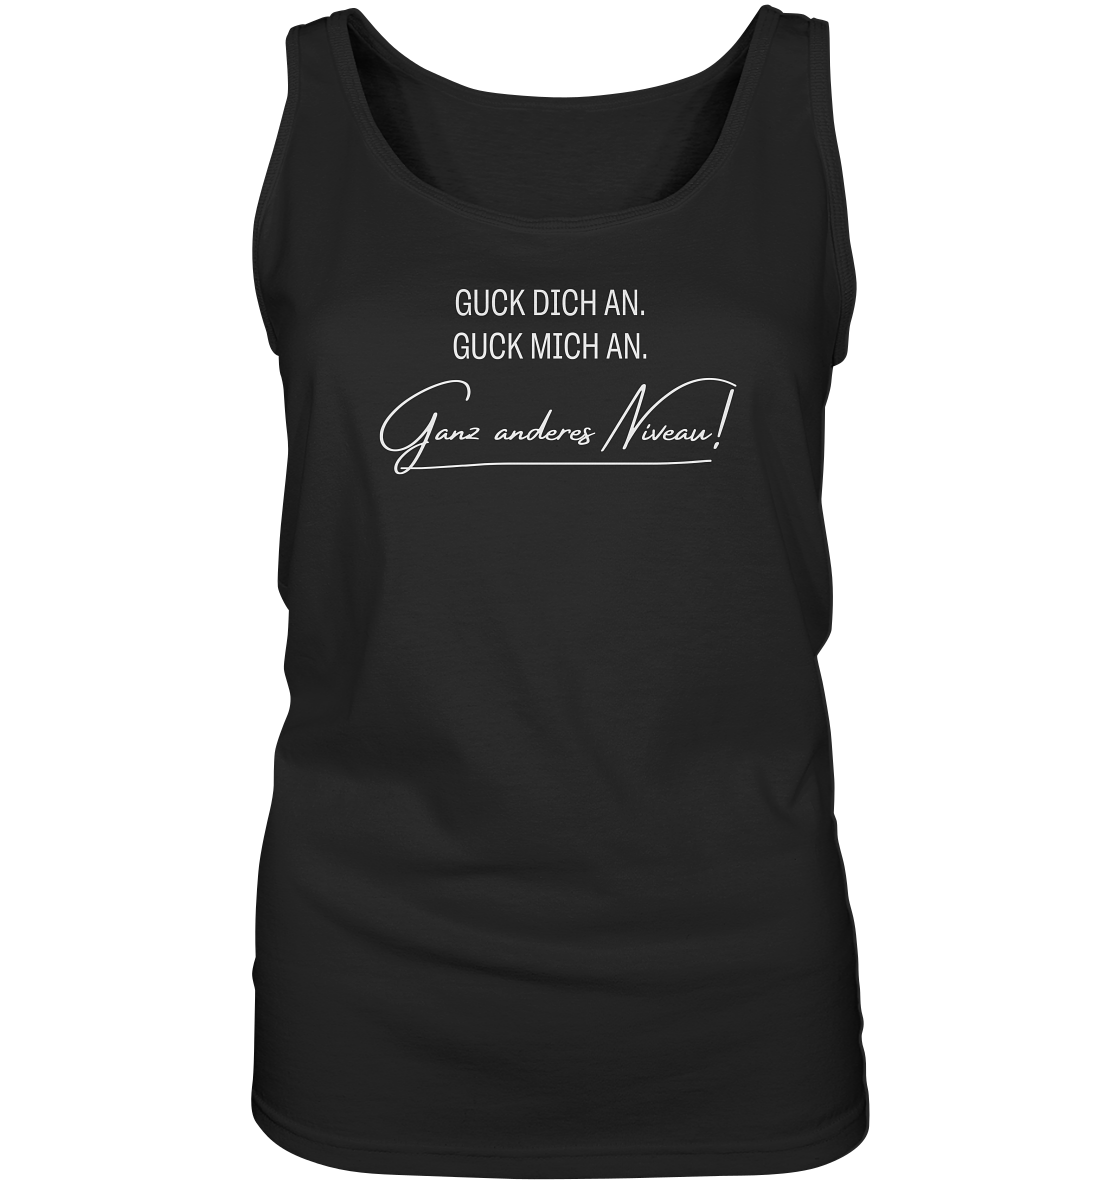 Guck dich an. Guck mich an. Ganz anderes Niveau! - Ladies Tank-Top